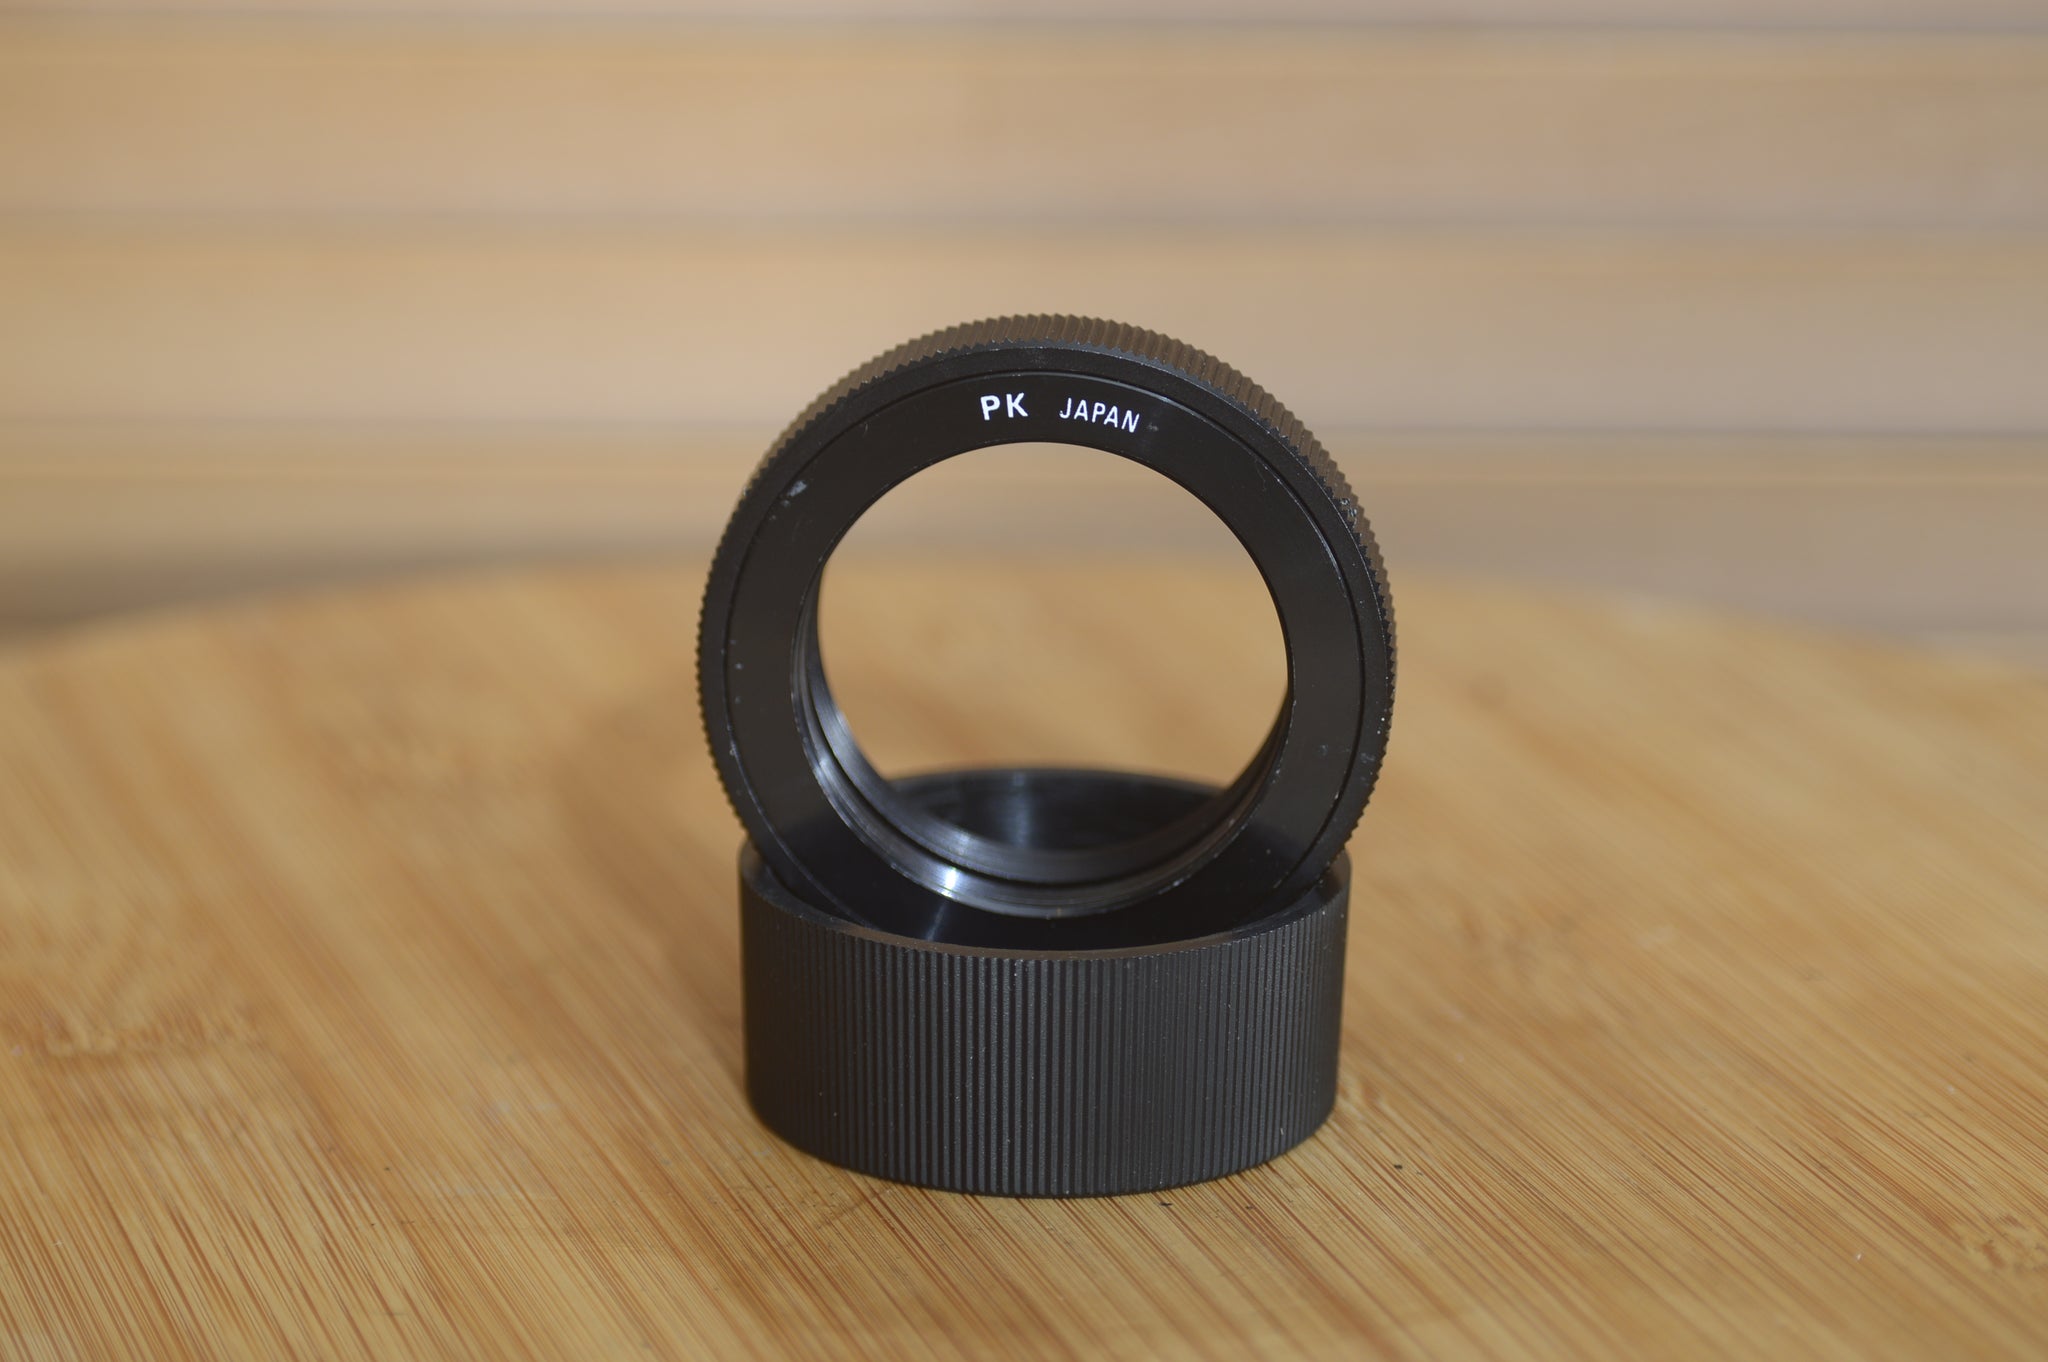 Pentax PK To M42 Adapter. Experience the fantastic M42 lenses on your Pentax SLR - Rewind Cameras 